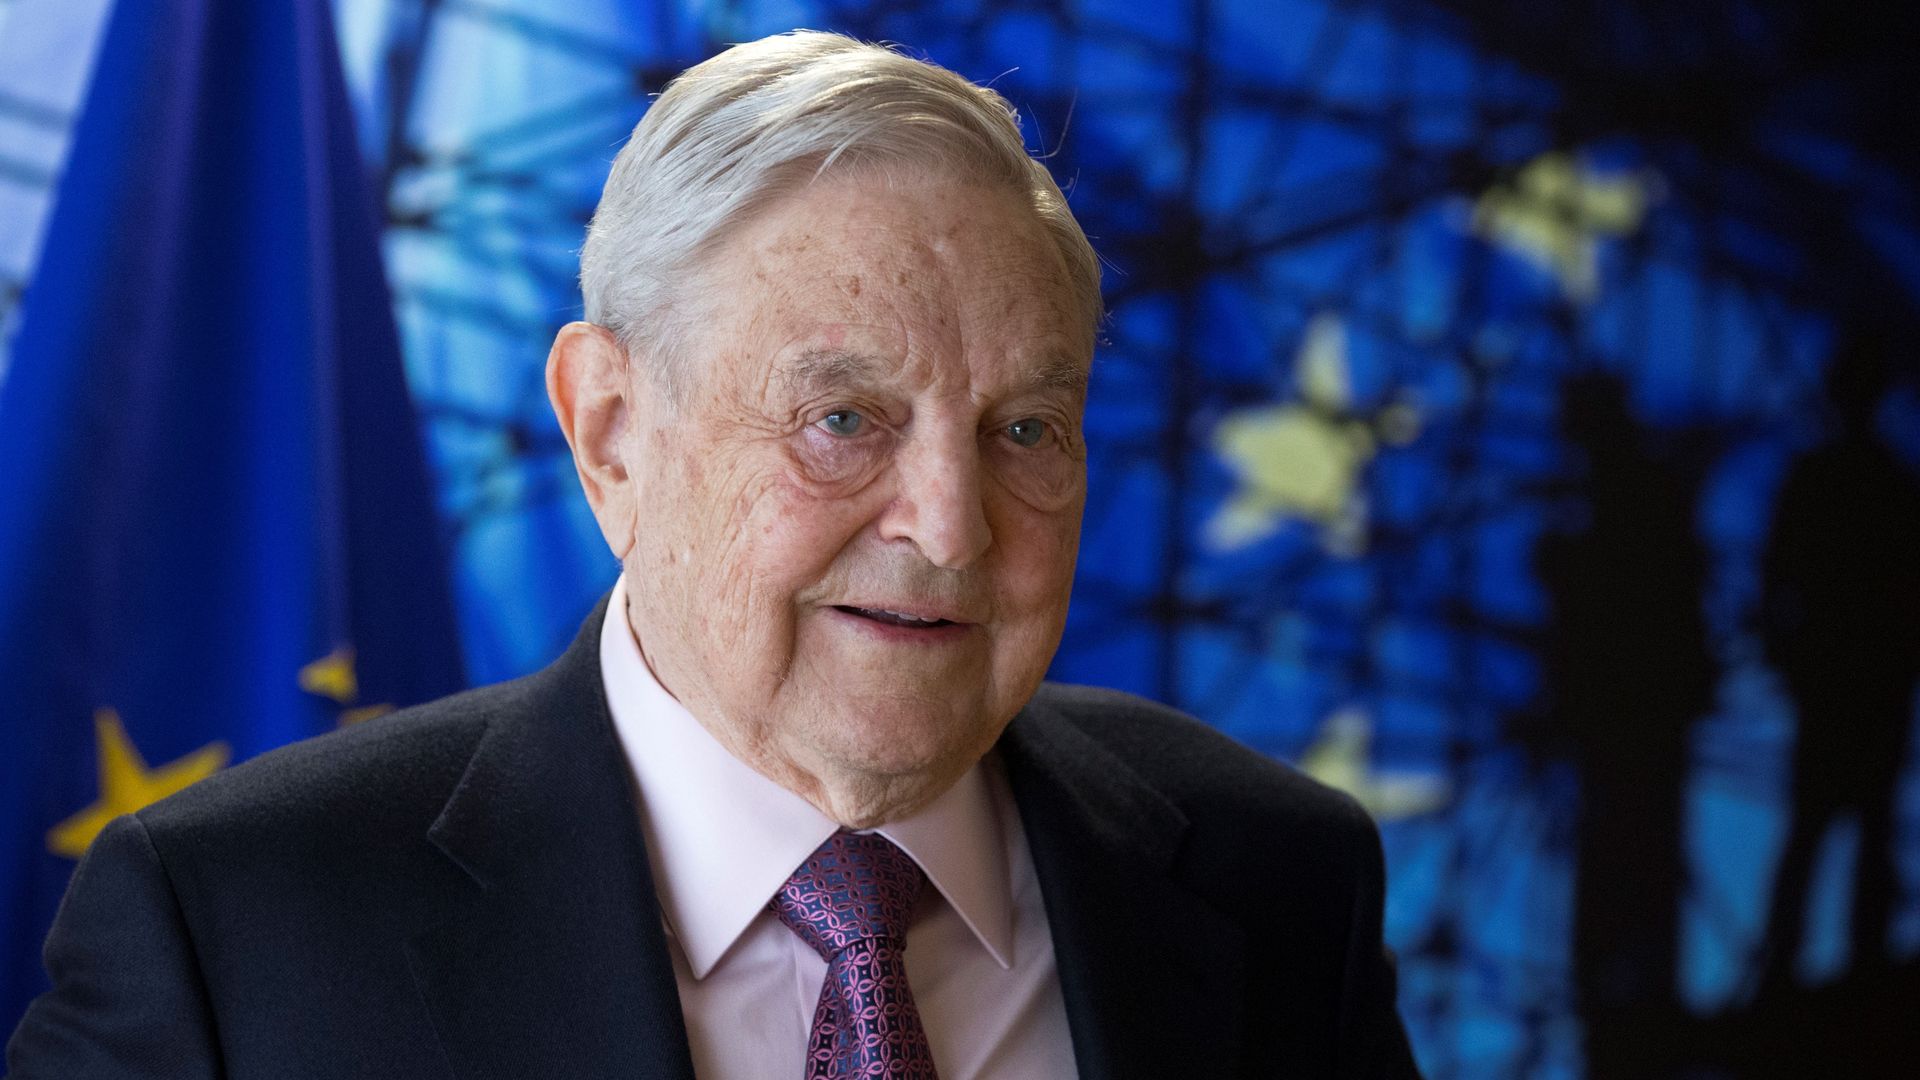 George Soros in front of the flag of the European Union